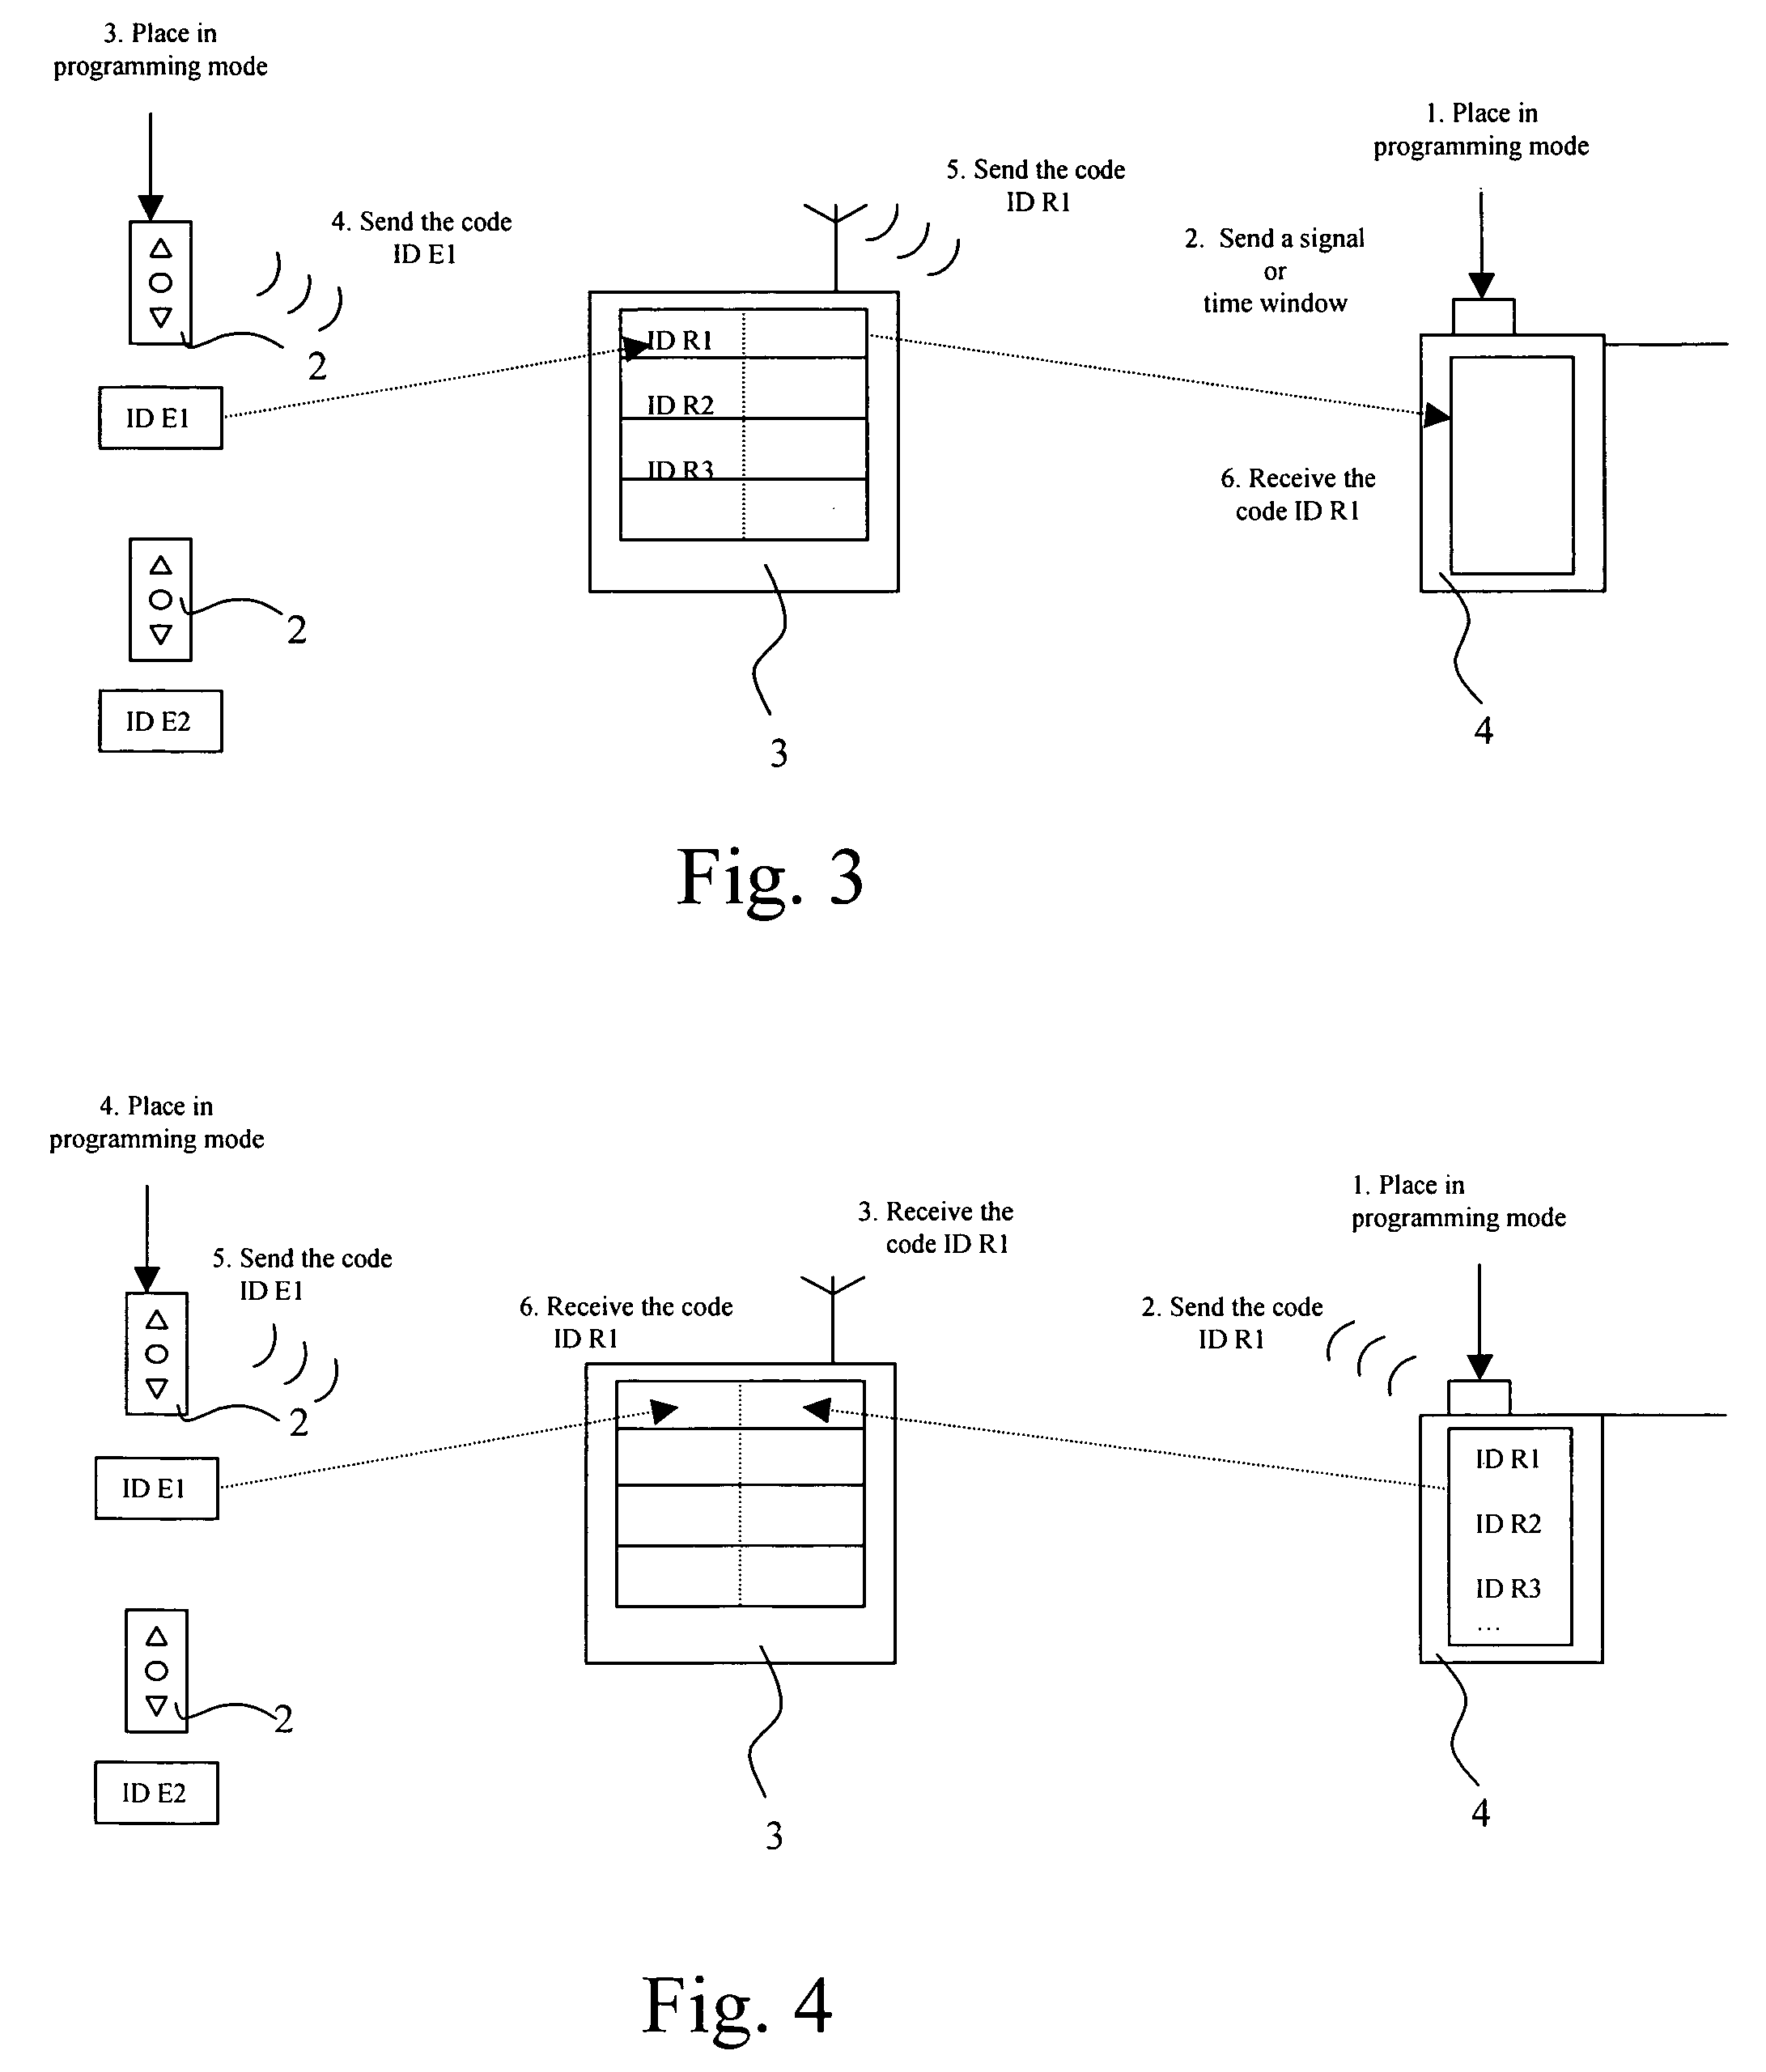 Process for remote communication between a command transmitter and a command receiver